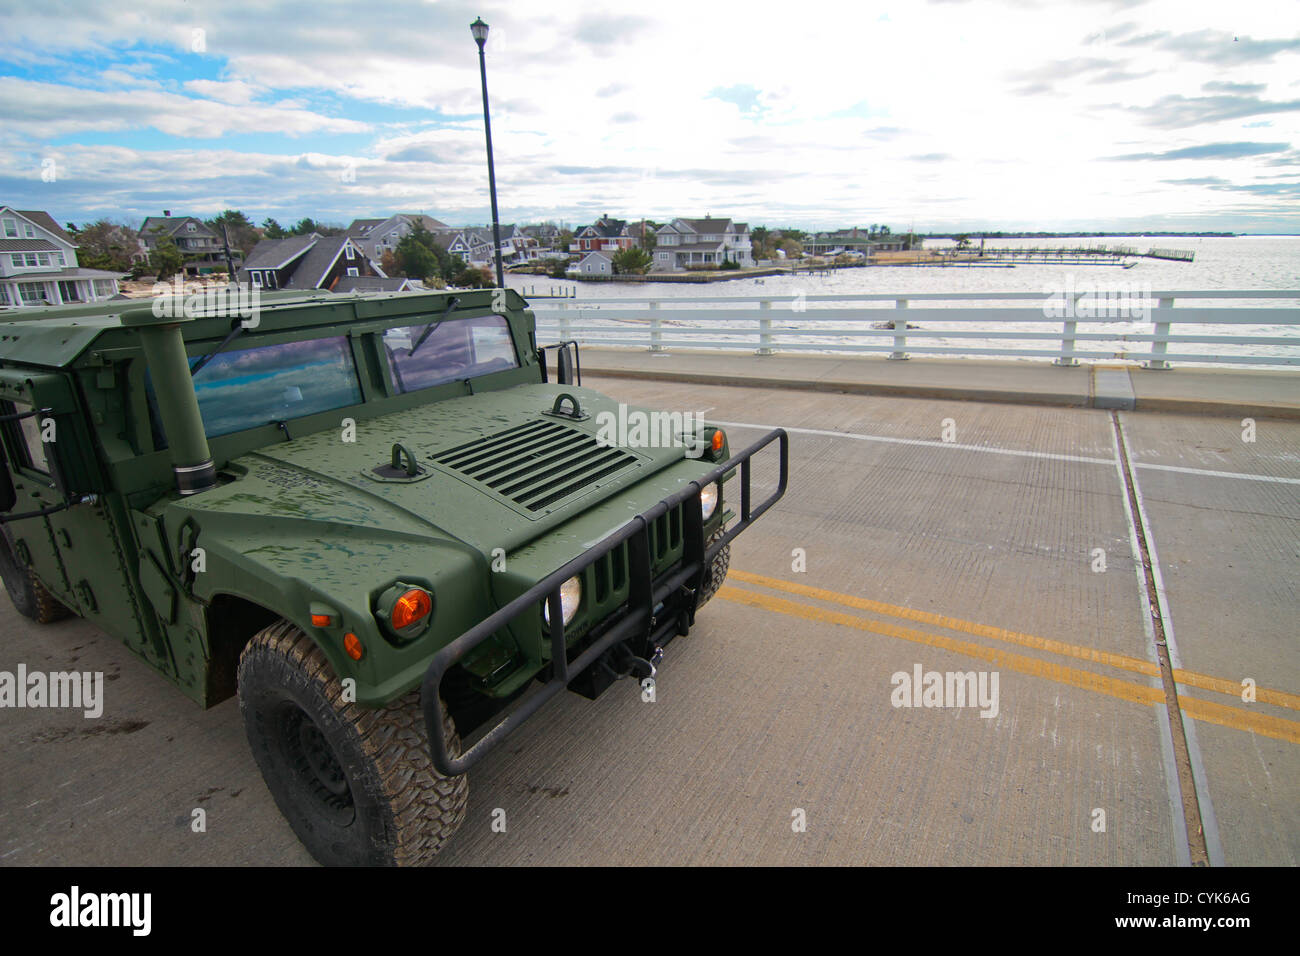 A New Jersey Air National Guard HUMMWV from the 177th Fighter Wing, New Jersey Air National Guard patrols the beach areas of Brick Township, N.J. on Nov 3. The 177th Fighter Wing Airmen are assisting local law enforcement in keeping the island safe. New J Stock Photo